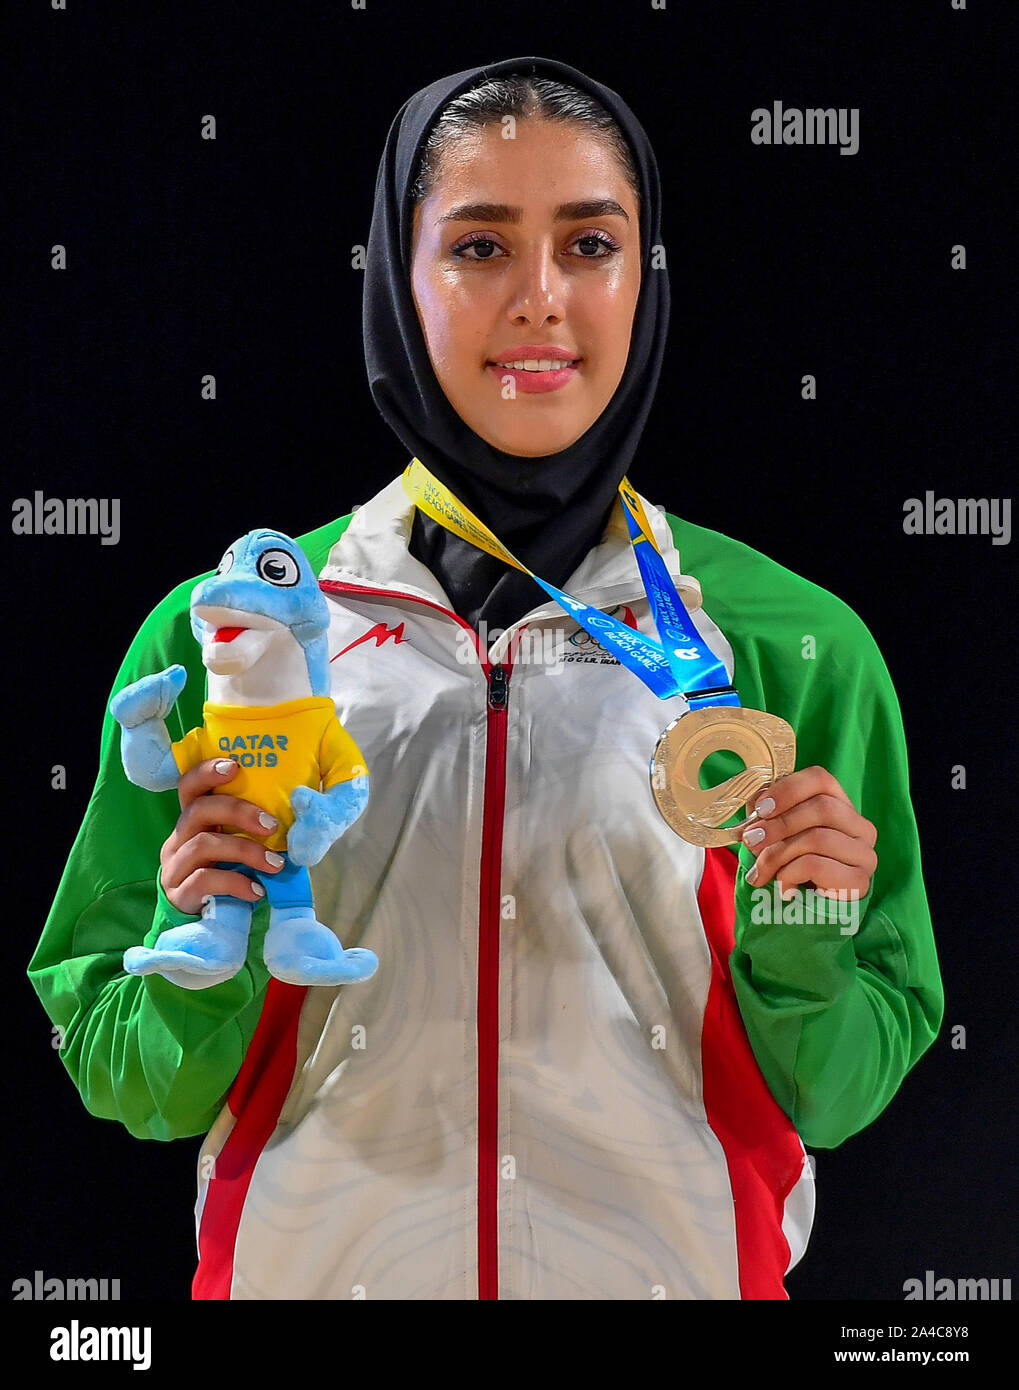 Doha, Qatar. 13th Oct, 2019. Fatemeh Sadeghi of Iran poses for photos during the medal ceremony of women's individual Kata event at the ANOC World Beach Games in Doha, Qatar, Oct. 13, 2019. Credit: Nikku/Xinhua/Alamy Live News Stock Photo